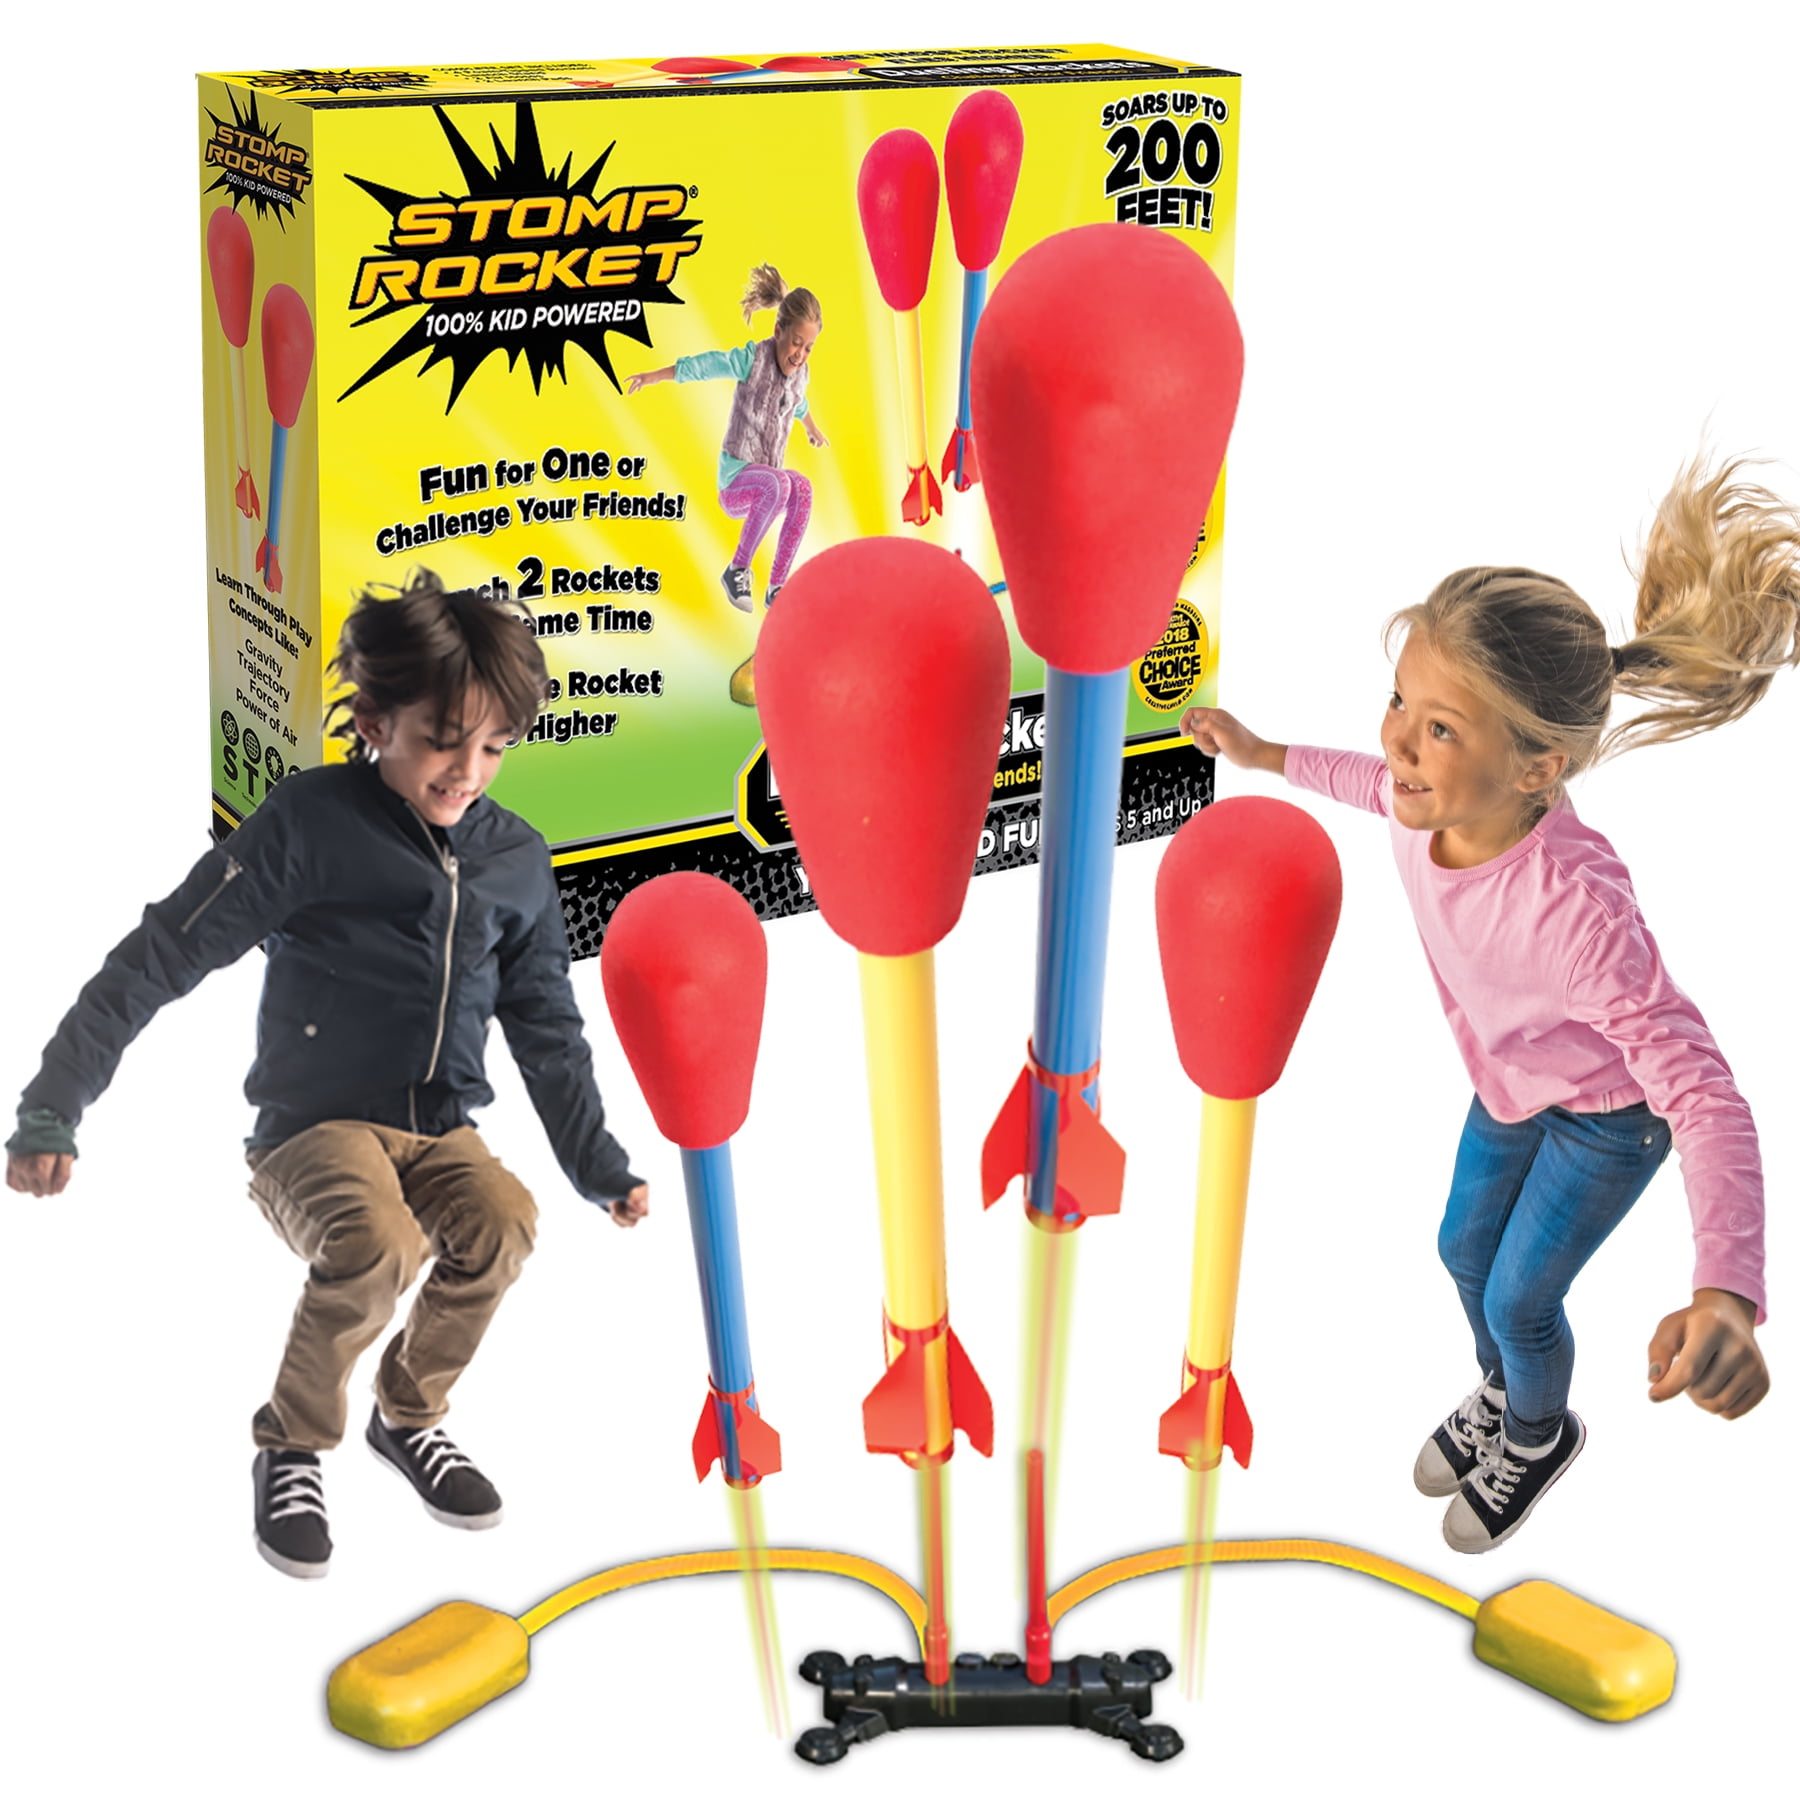 Stomp Rocket Jr Glow Rocket 4 Rockets and Toy Launcher Outdoor Gift Boys Girls 